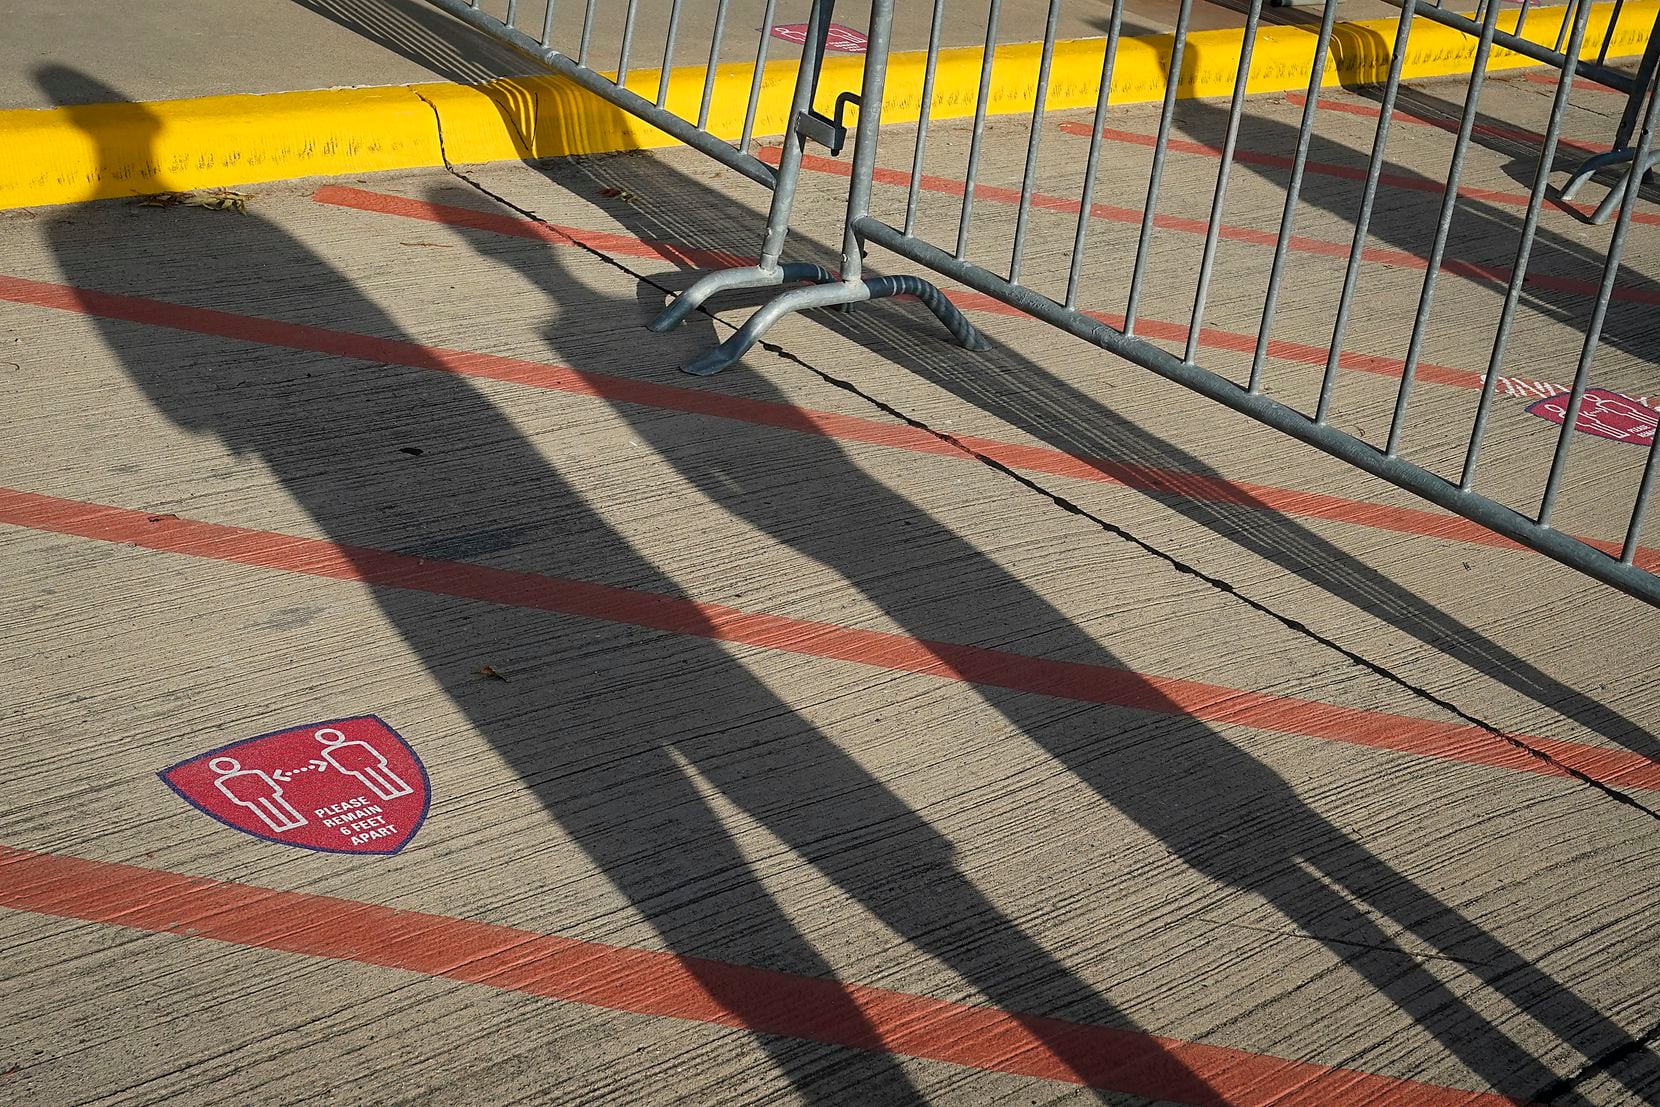 Jeff Files and his son Bentley. 9, cast shadows across social distancing markers are the first in line to enter the West Gate before an MLS soccer game between FC Dallas and Nashville SC at Toyota Stadium on Wednesday, Aug. 12, 2020, in Frisco, Texas. (Smiley N. Pool/The Dallas Morning News)